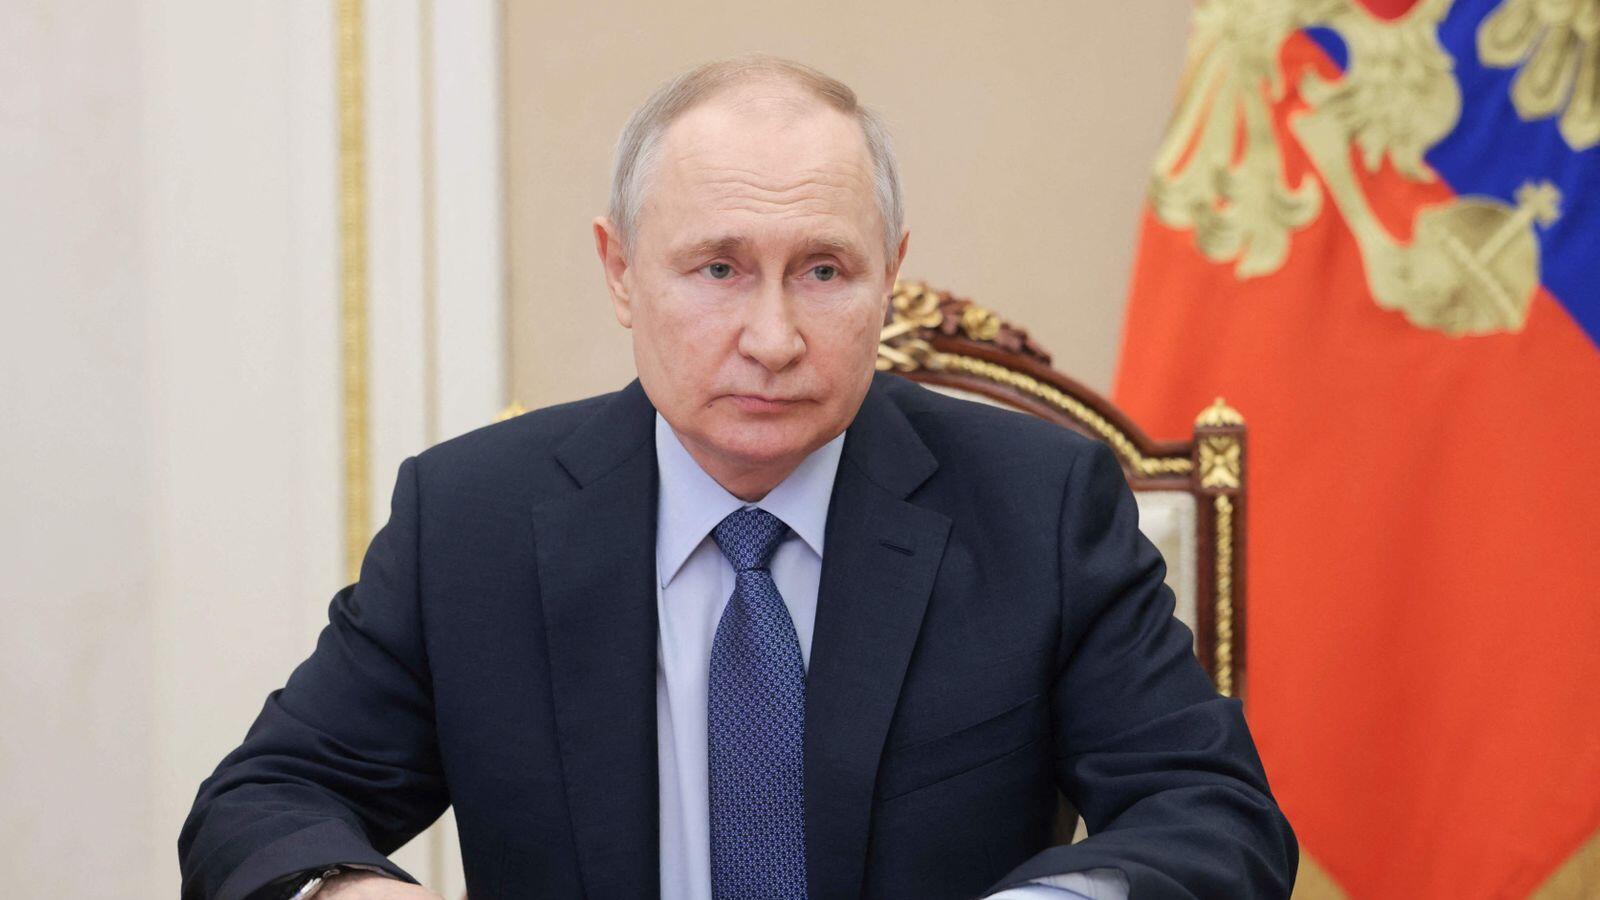 Explained: What the ICC arrest warrant means for Russia's Putin  - News